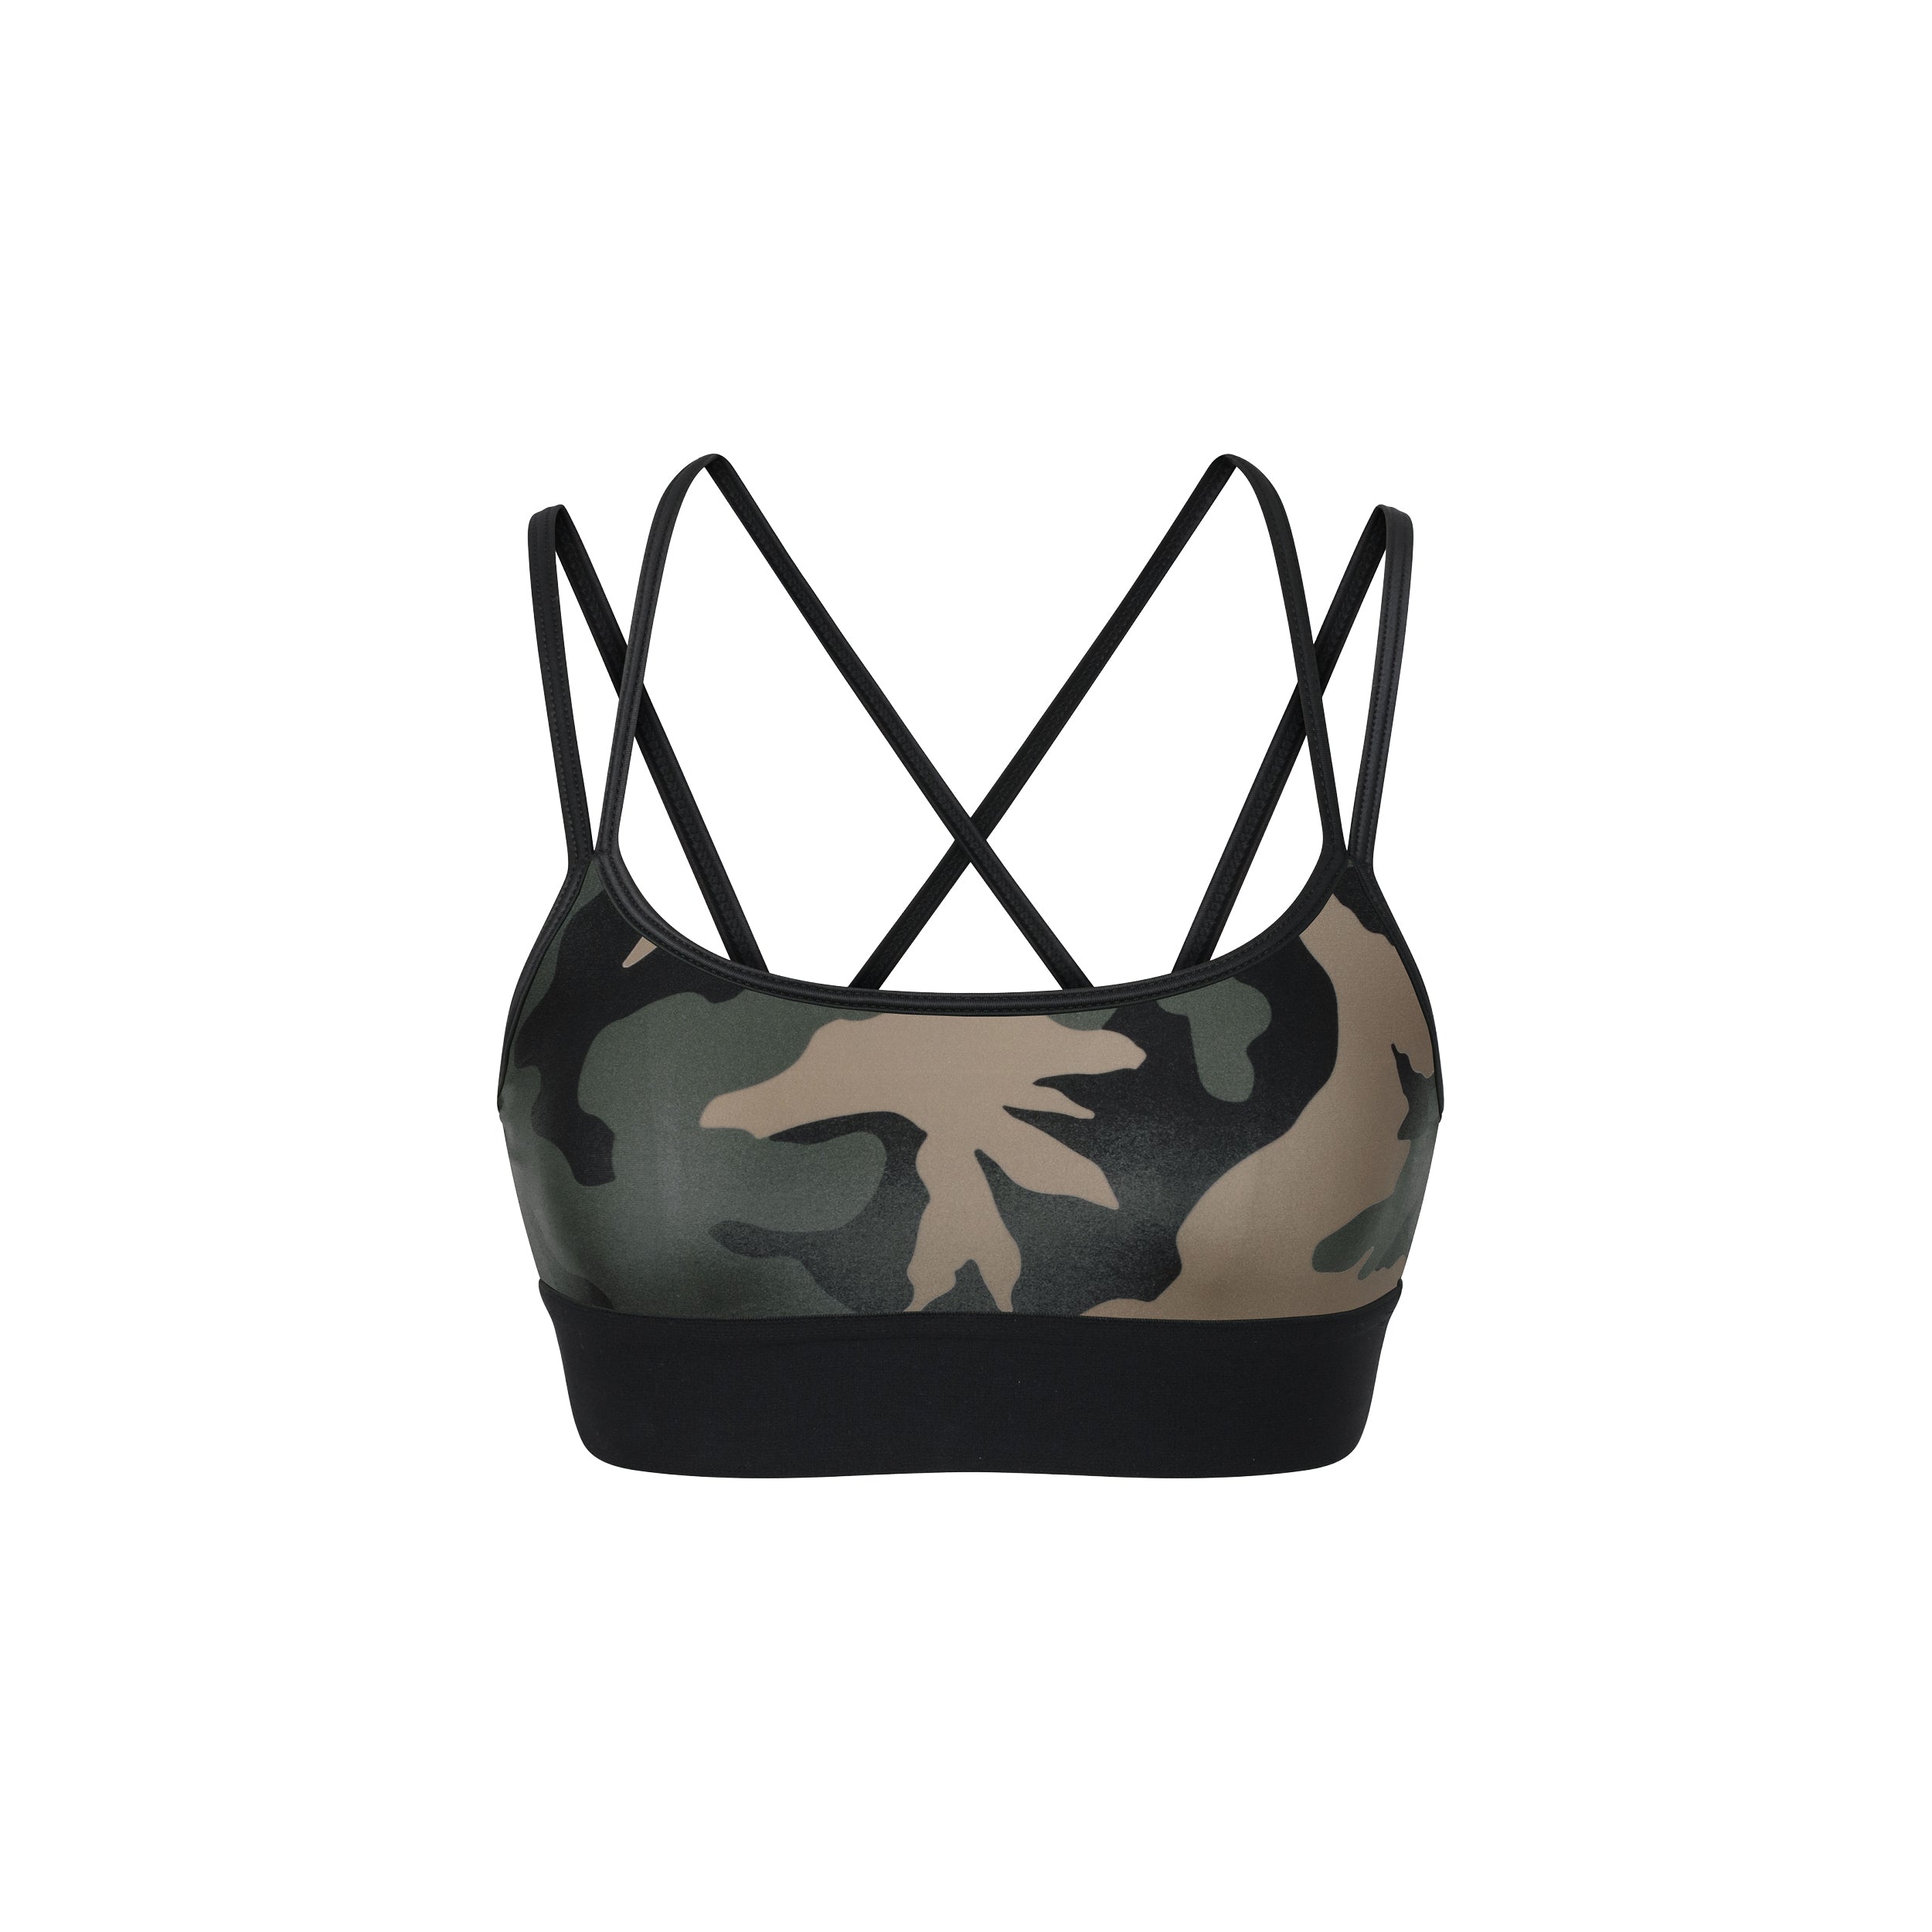 Product view of camo printed gloss liquid sports bra featuring a scoop neckline and an alluring strappy back with a supportive elastic band